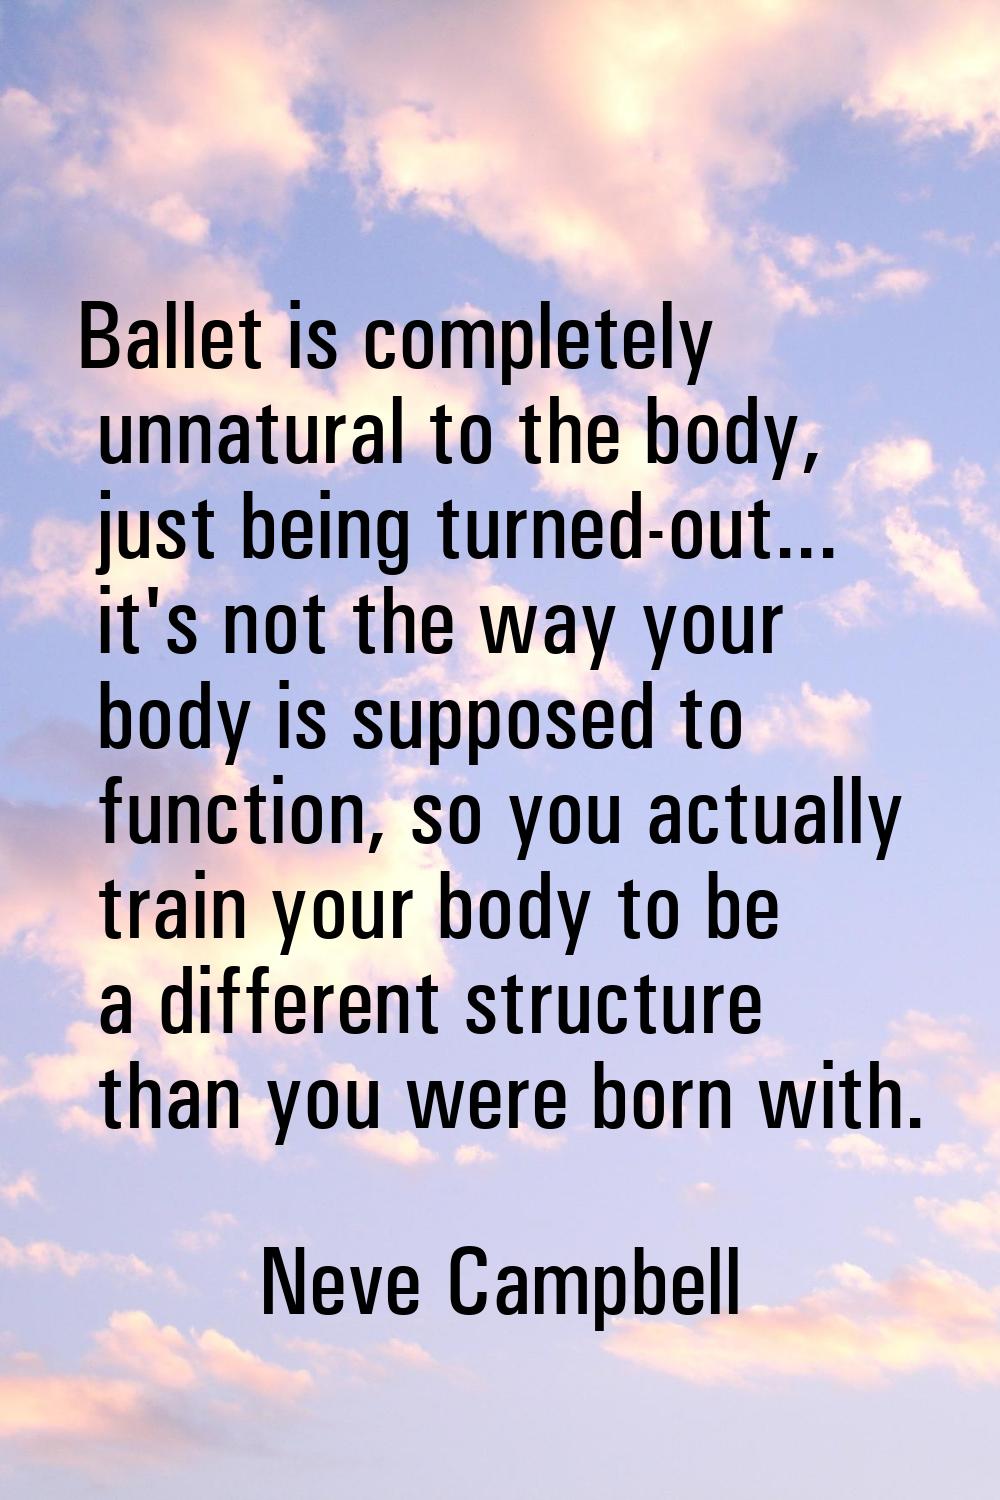 Ballet is completely unnatural to the body, just being turned-out... it's not the way your body is 